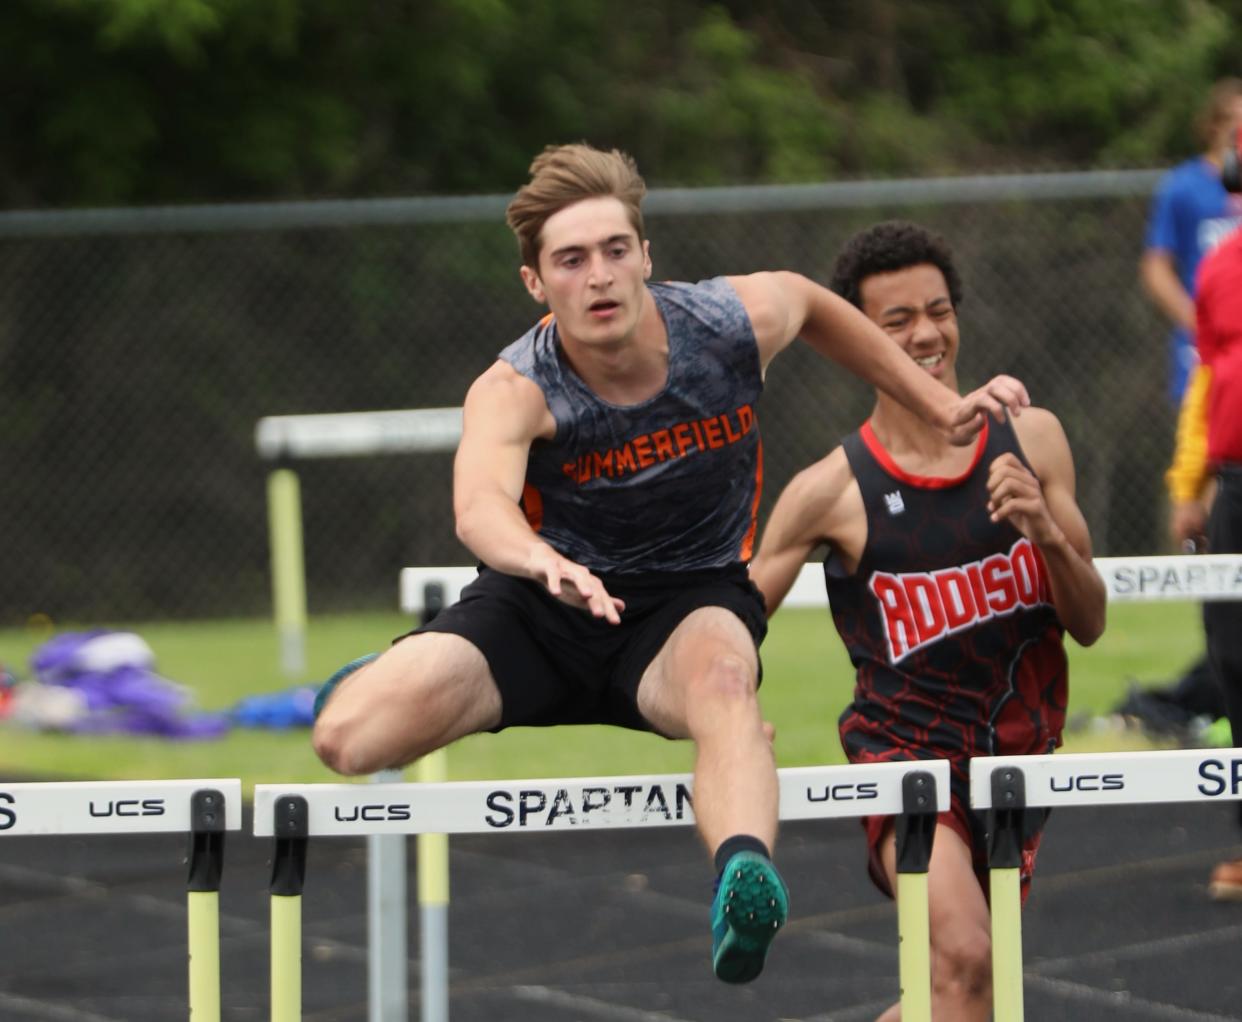 Summerfield's Nathan Herrmann competes in the high hurdles during the Division 4 Regional Saturday, May 21, 2022 at Webberville.